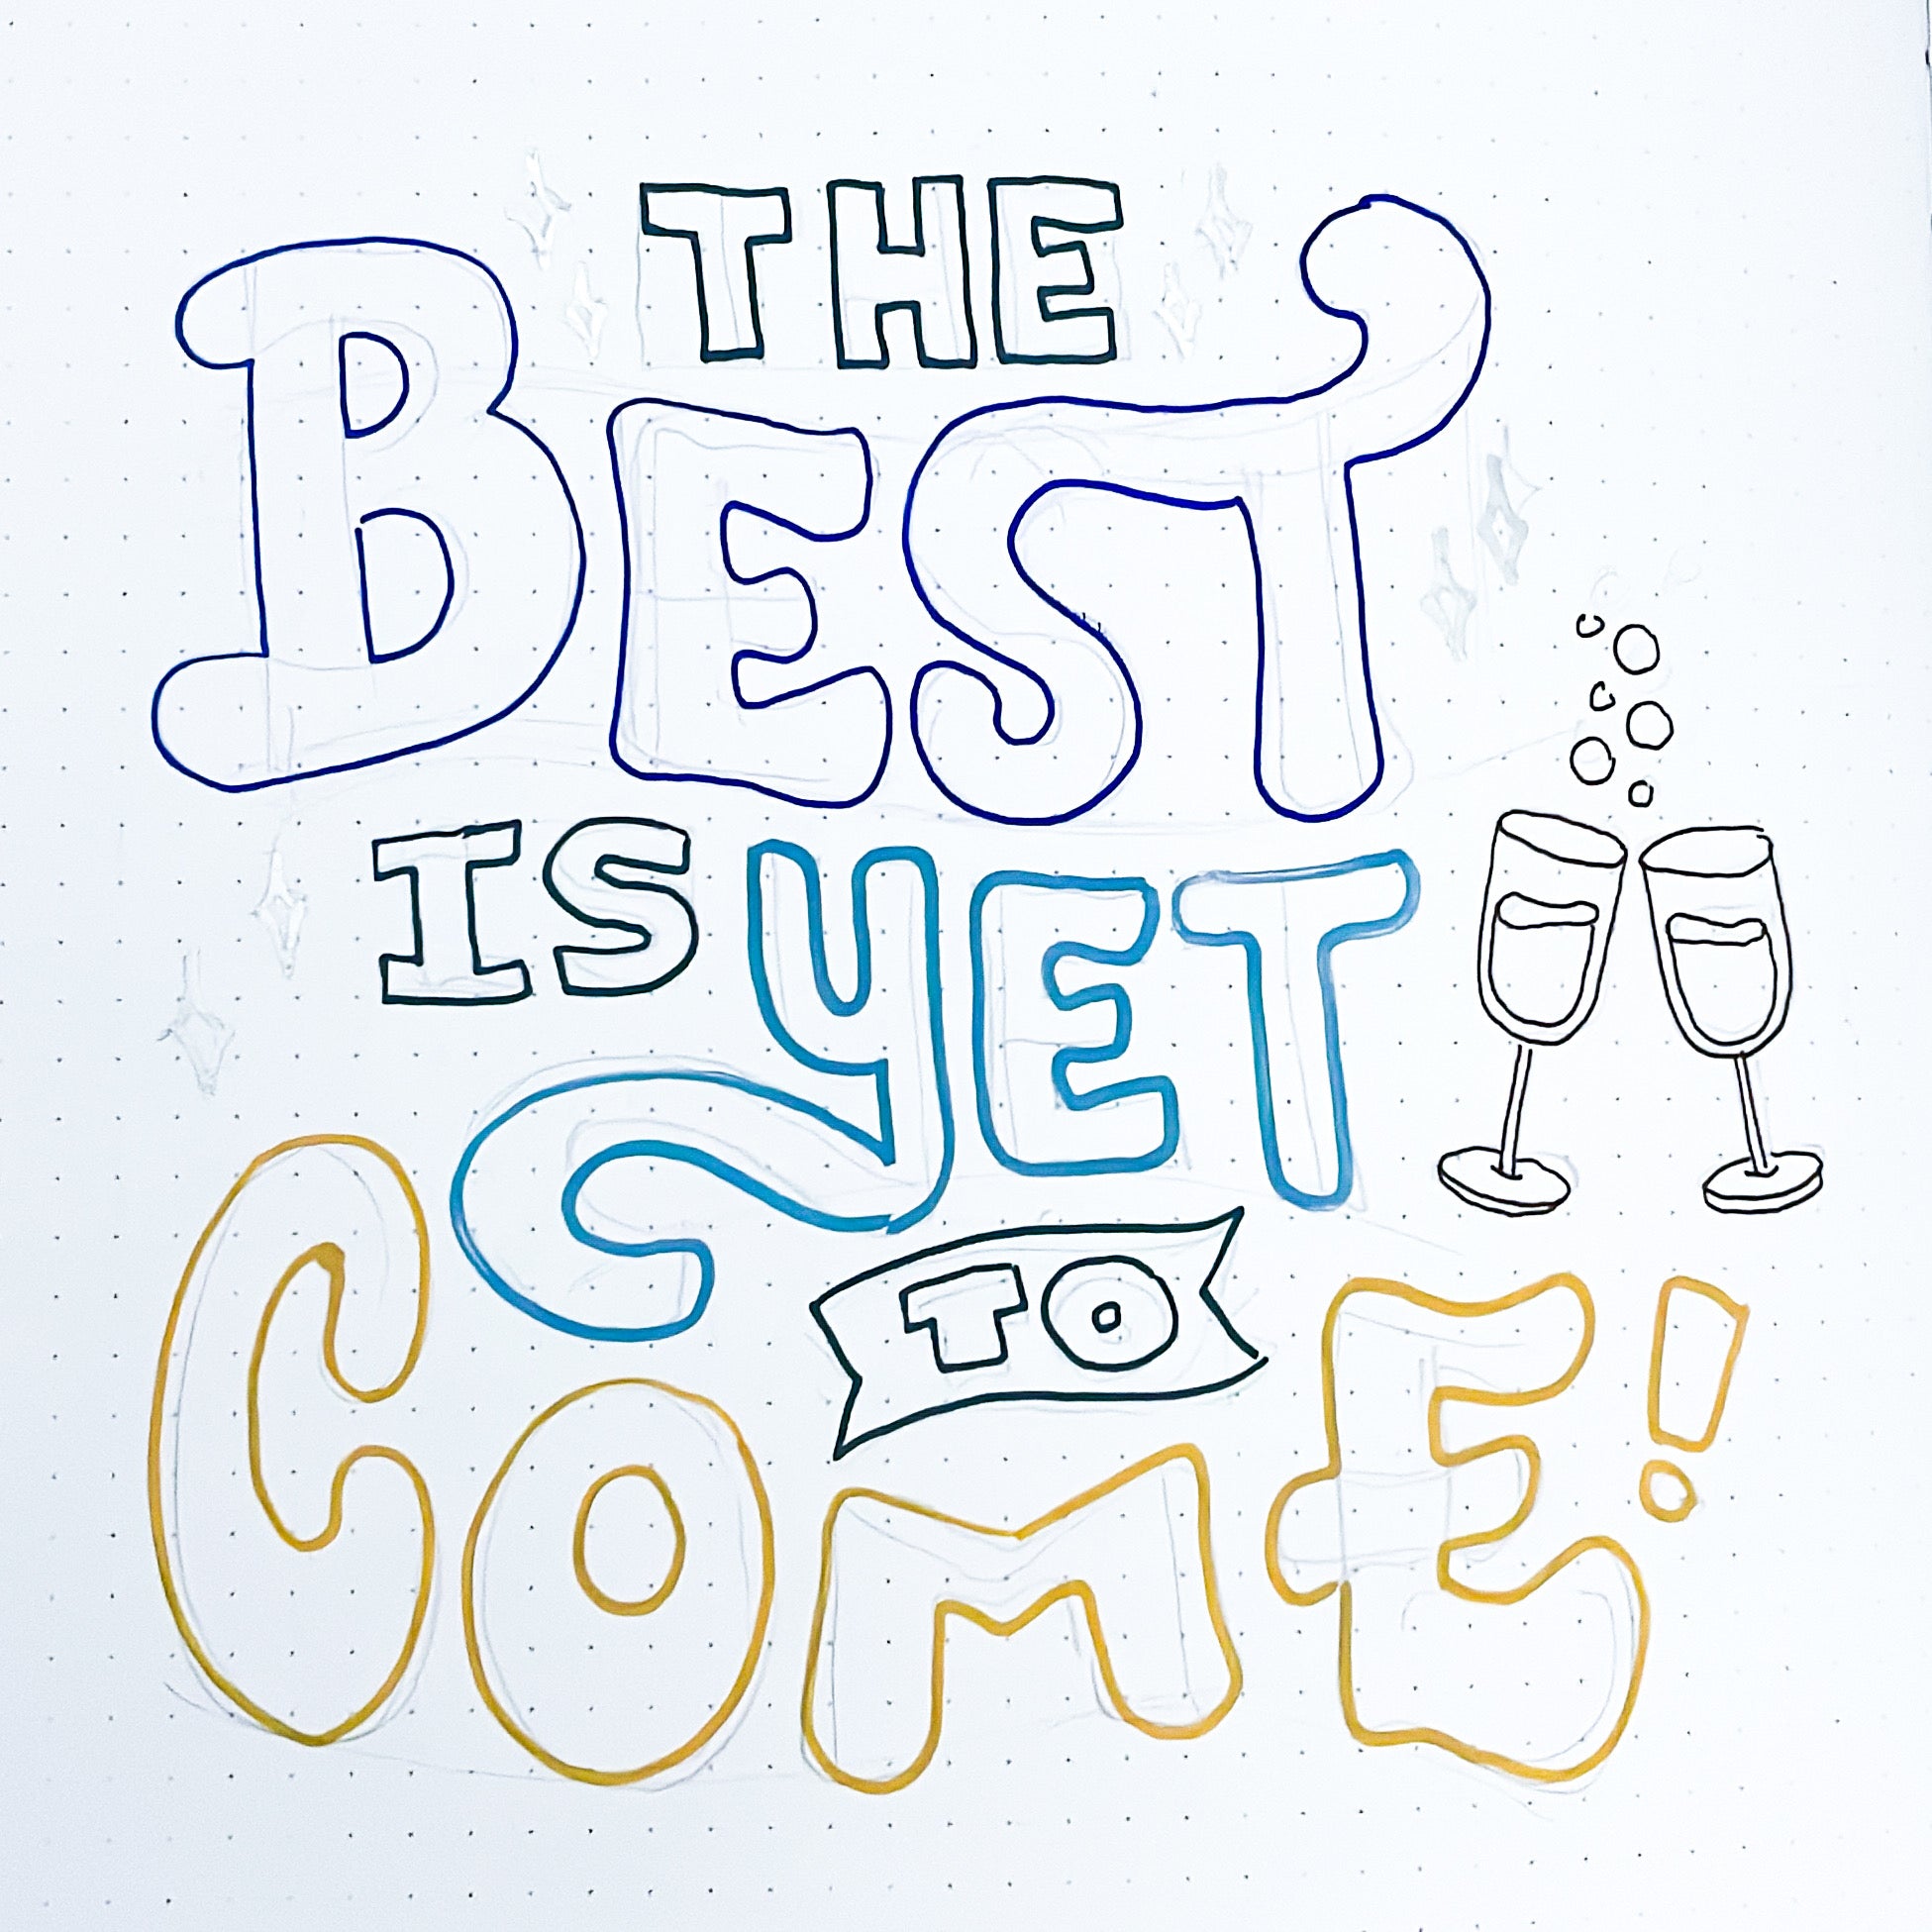 image of outlined "The Best is Yet to Come" in ink